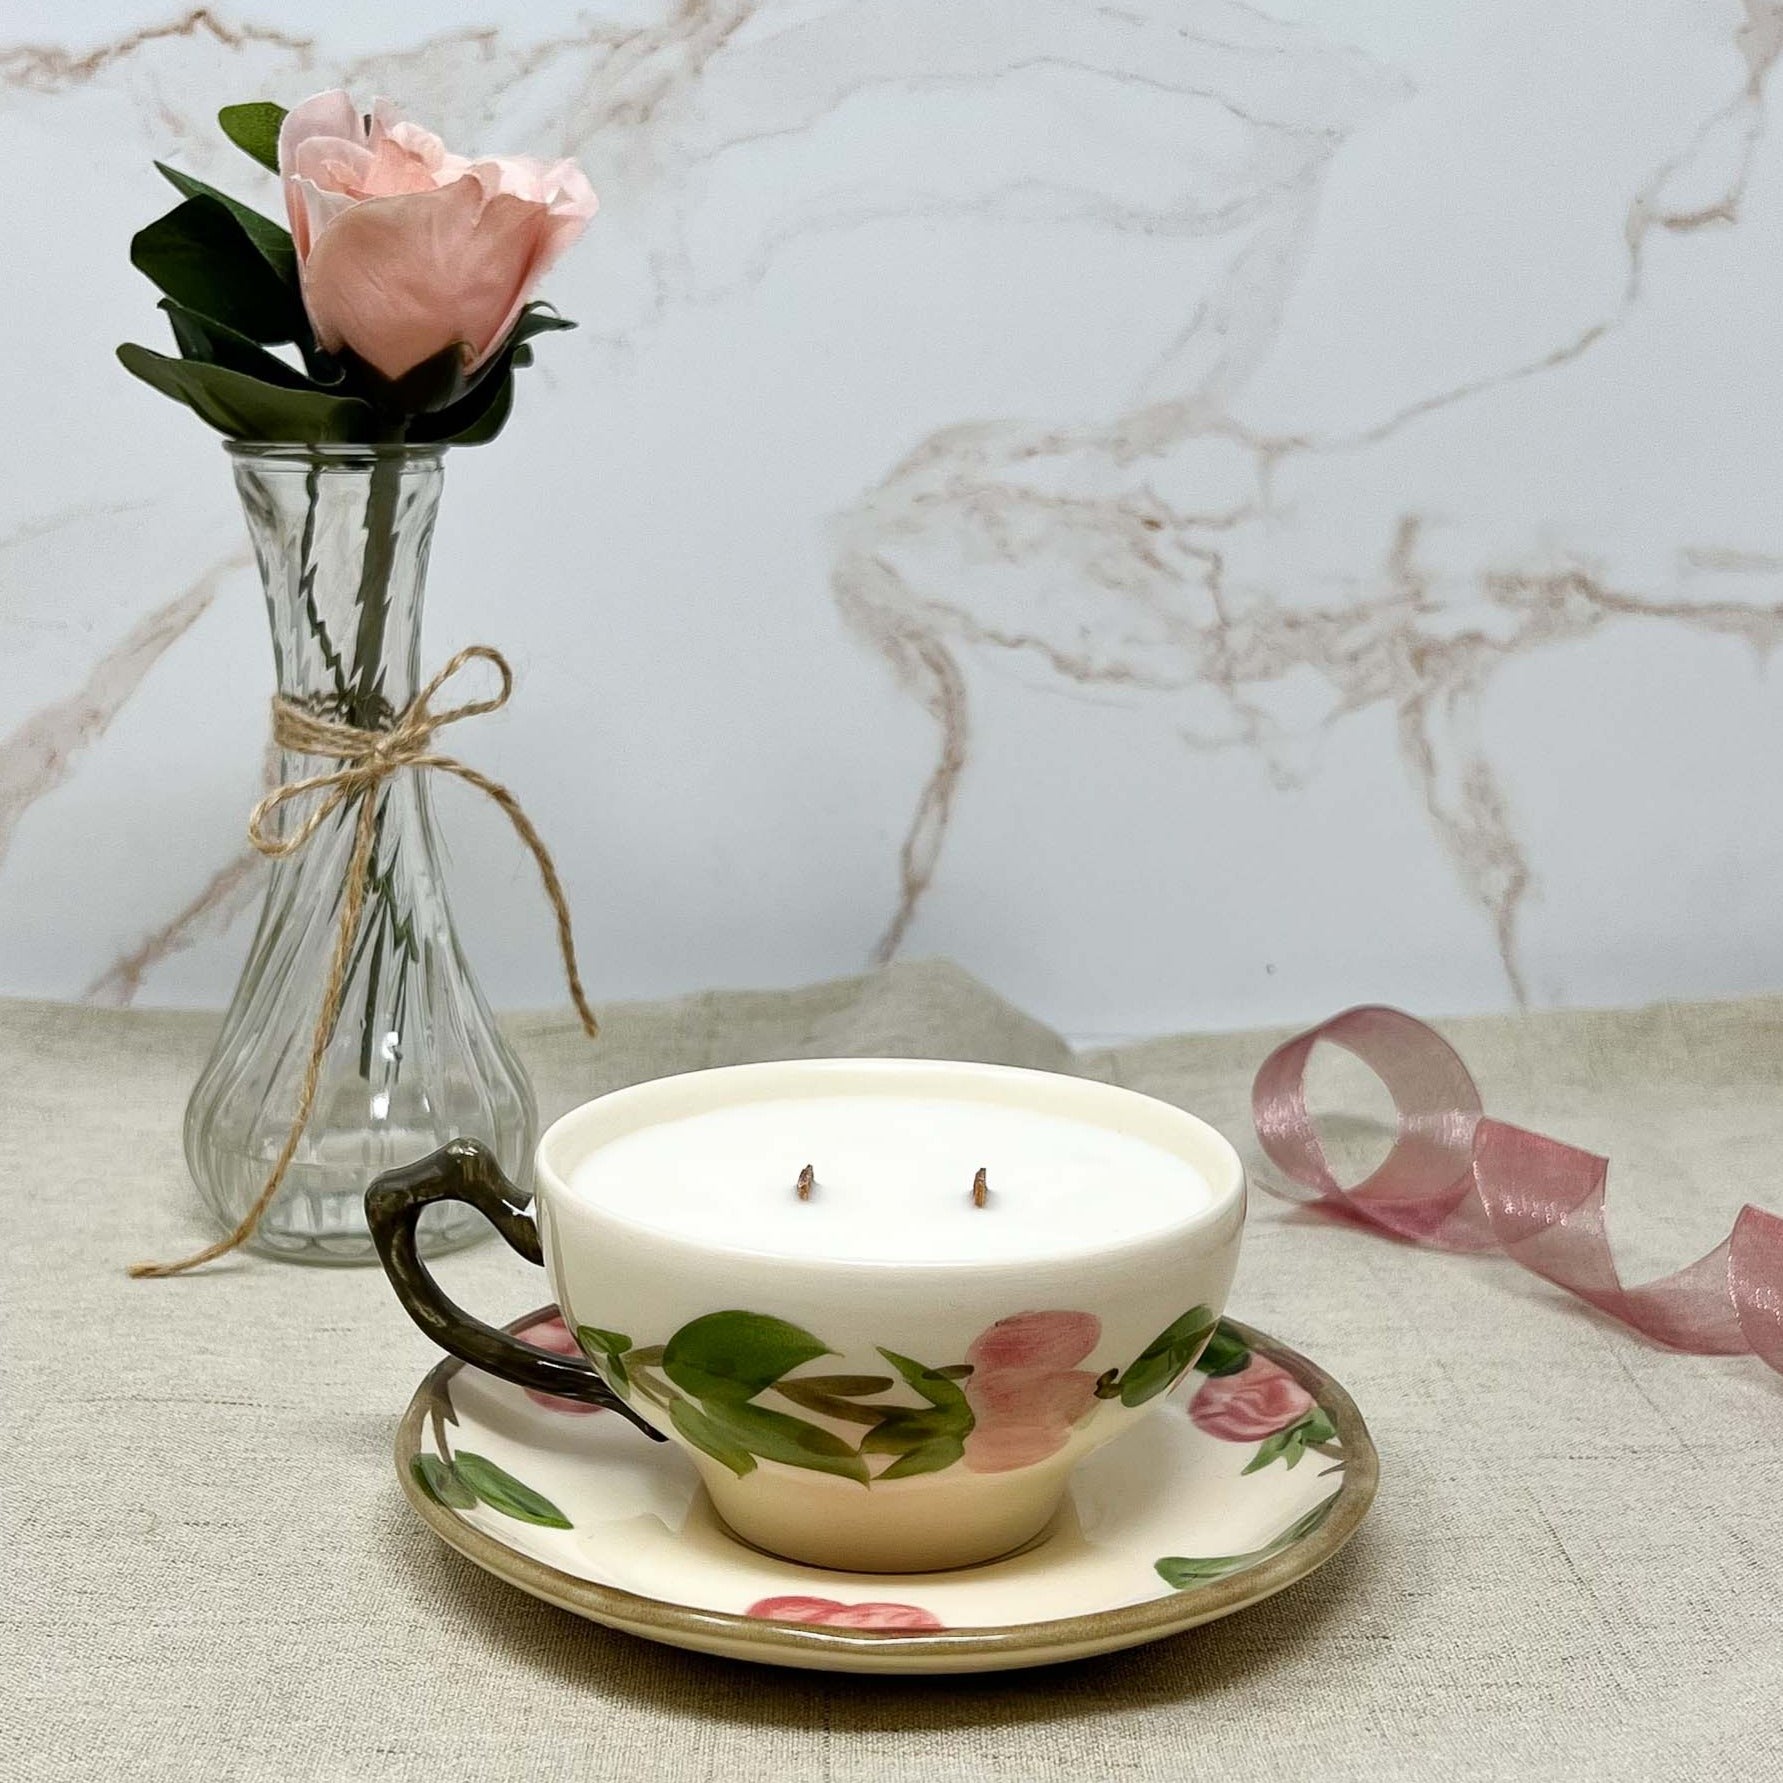 Desert Rose Teacup & Saucer upcycled into a rose scented teacup candle with matching saucer.